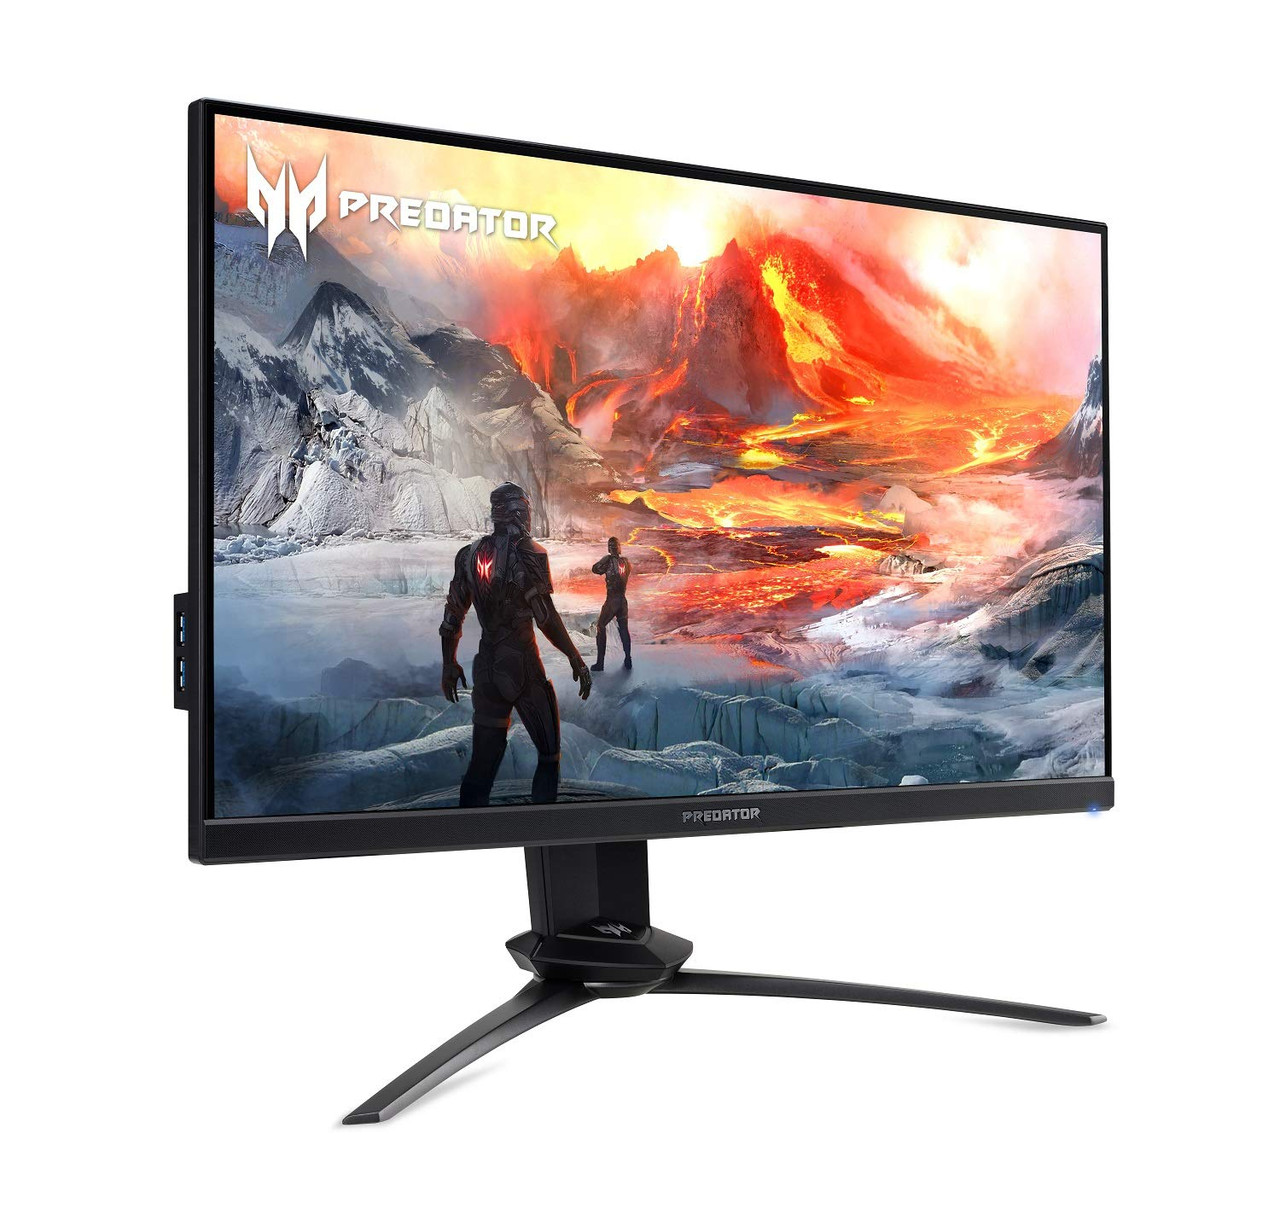 Saqrstore on X: Twisted Minds FHD 25'' 360hz Gaming Monitor #gaming  #gaminglife #monitor #gamingmonitor #gamingmonitors #360hz #360hzdisplay  #twistedmind #fhd #saqr #saqrstore #saqrstores Buy now :    / X